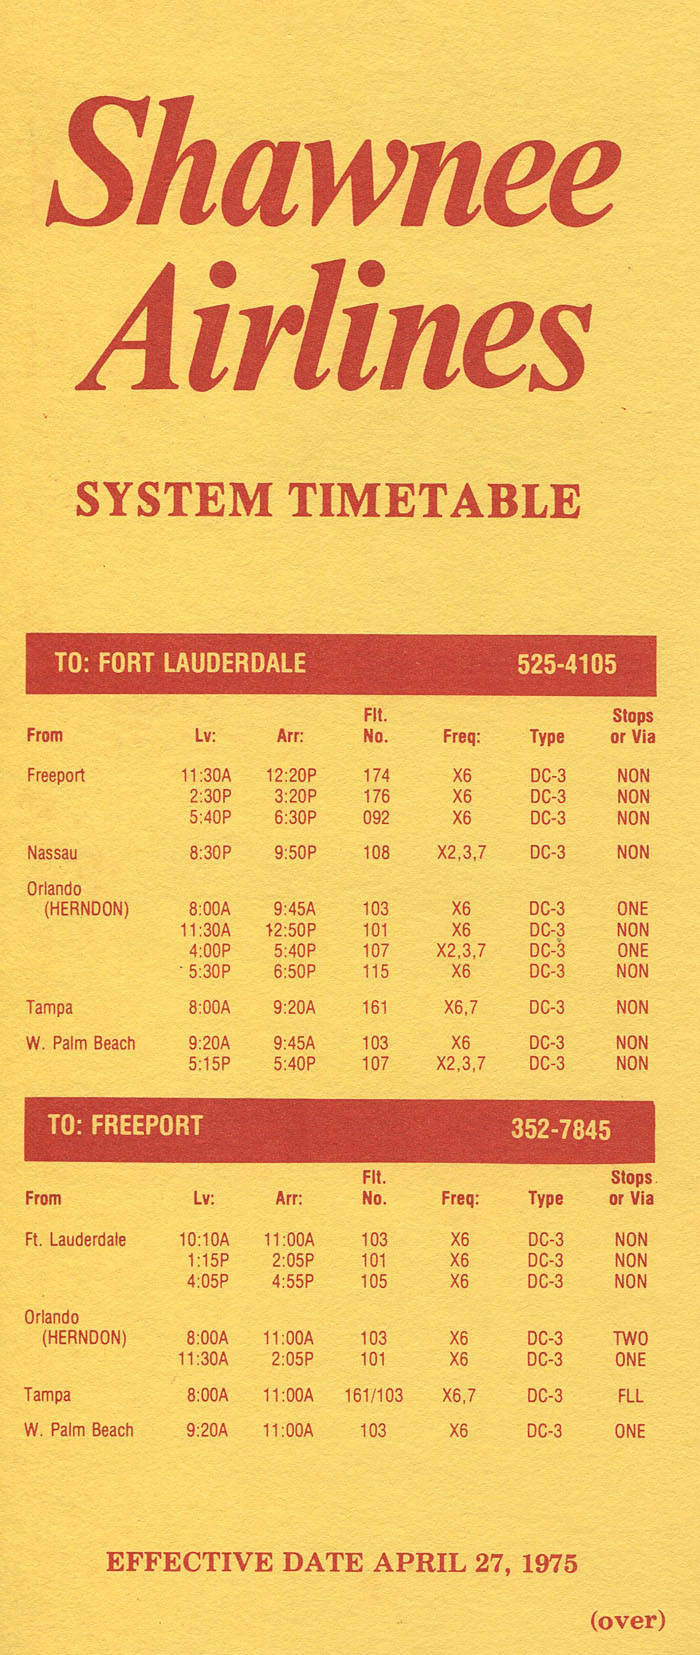 Shawnee Airlines timetable 1975